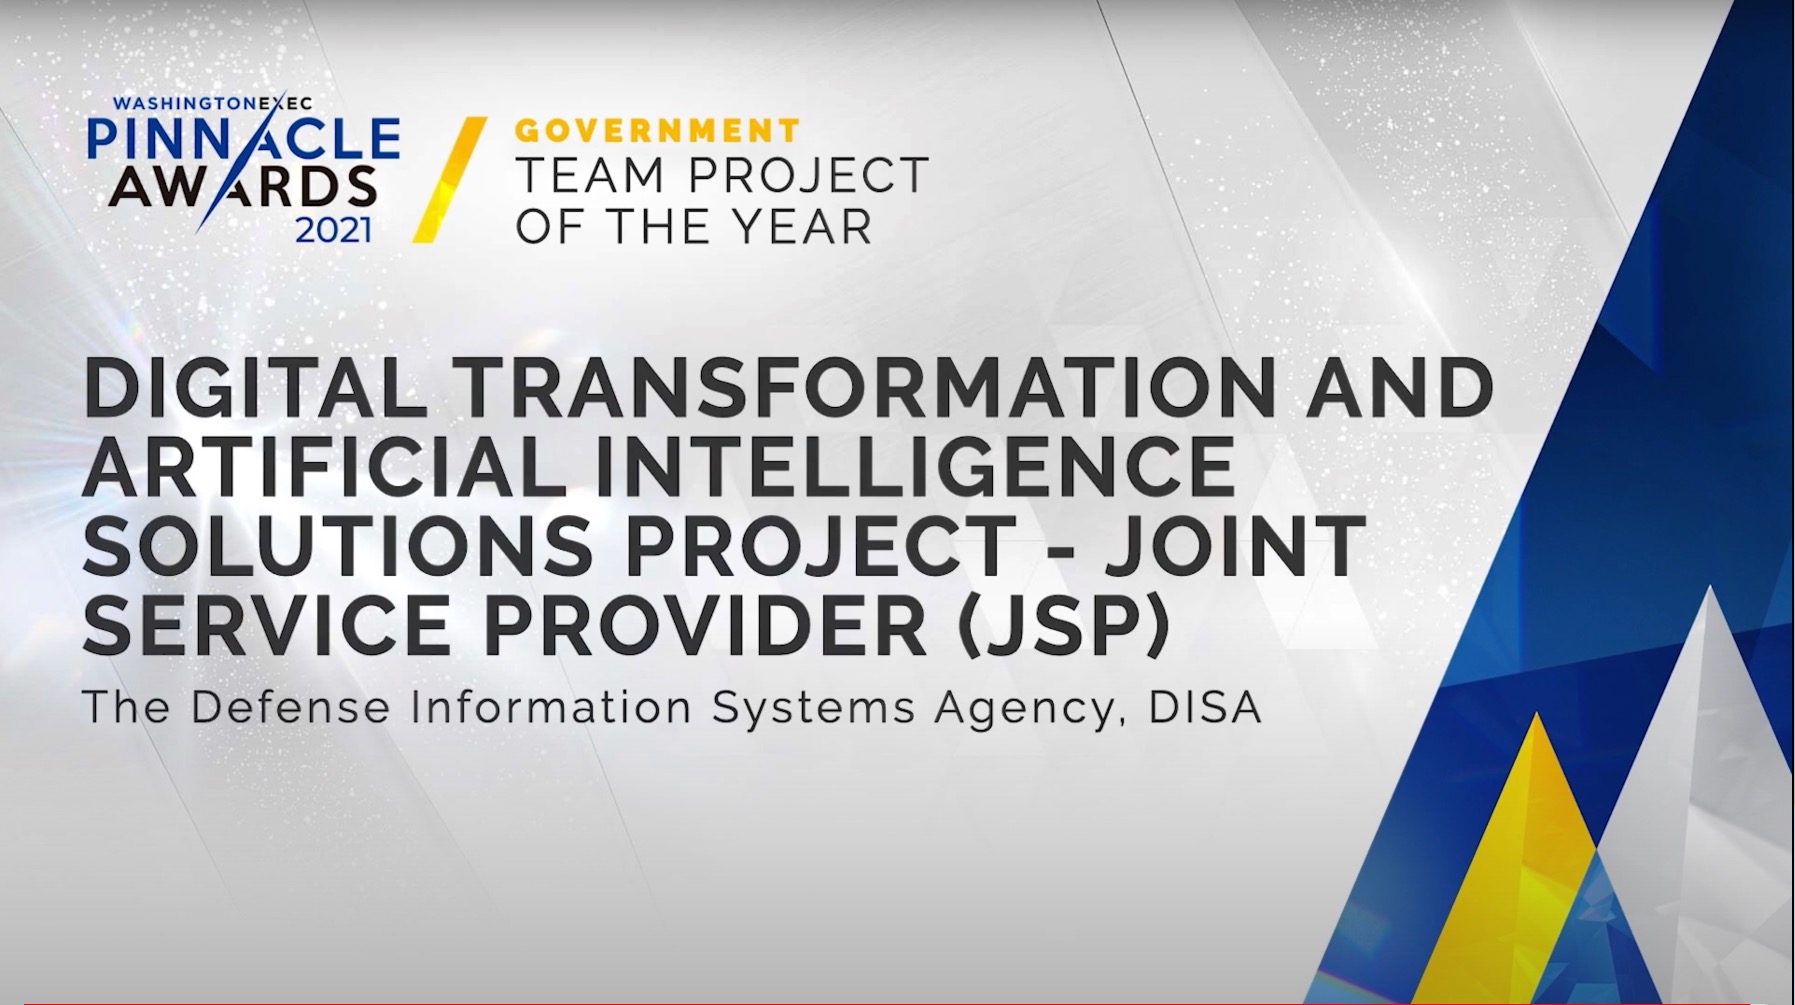 Government TEAM - Congratulations to the Digital Transformation and Artificial Intelligence Solutions Project - Joint Service Provider (JSP) from the Defense Information Systems Agency (DISA) on winning an award for Government TEAM Project of the Year!